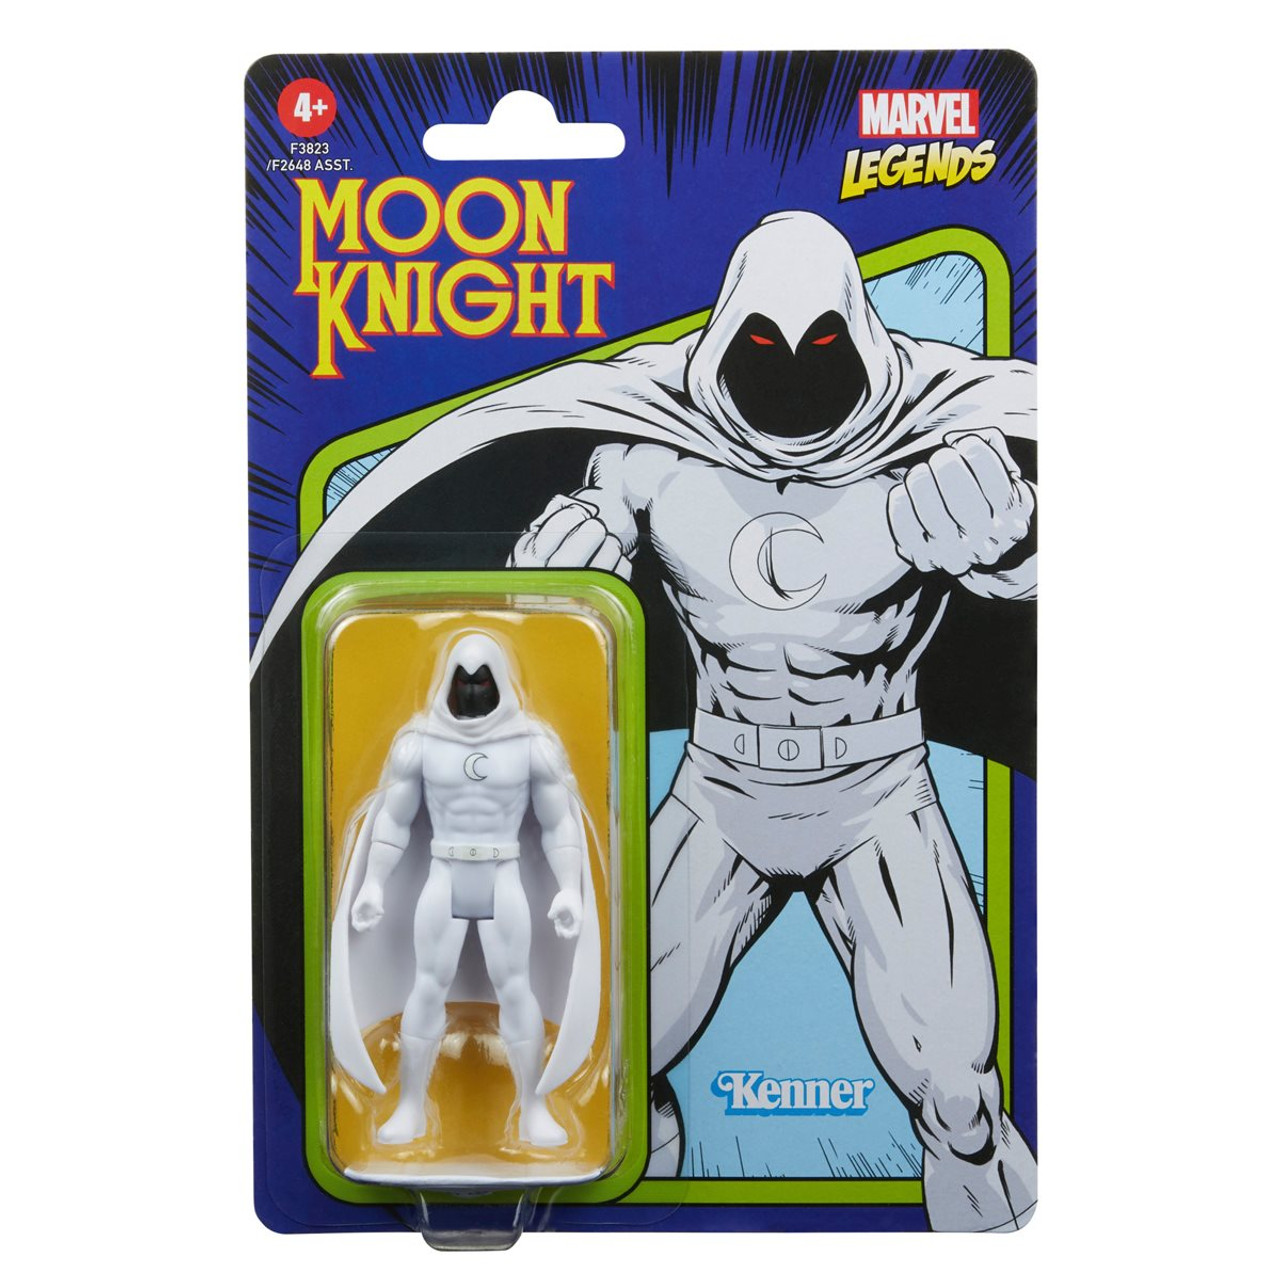 MOON KNIGHT #24 BAGLEY ULTIMATE LAST LOOK VAR – Lake Hartwell Collectibles